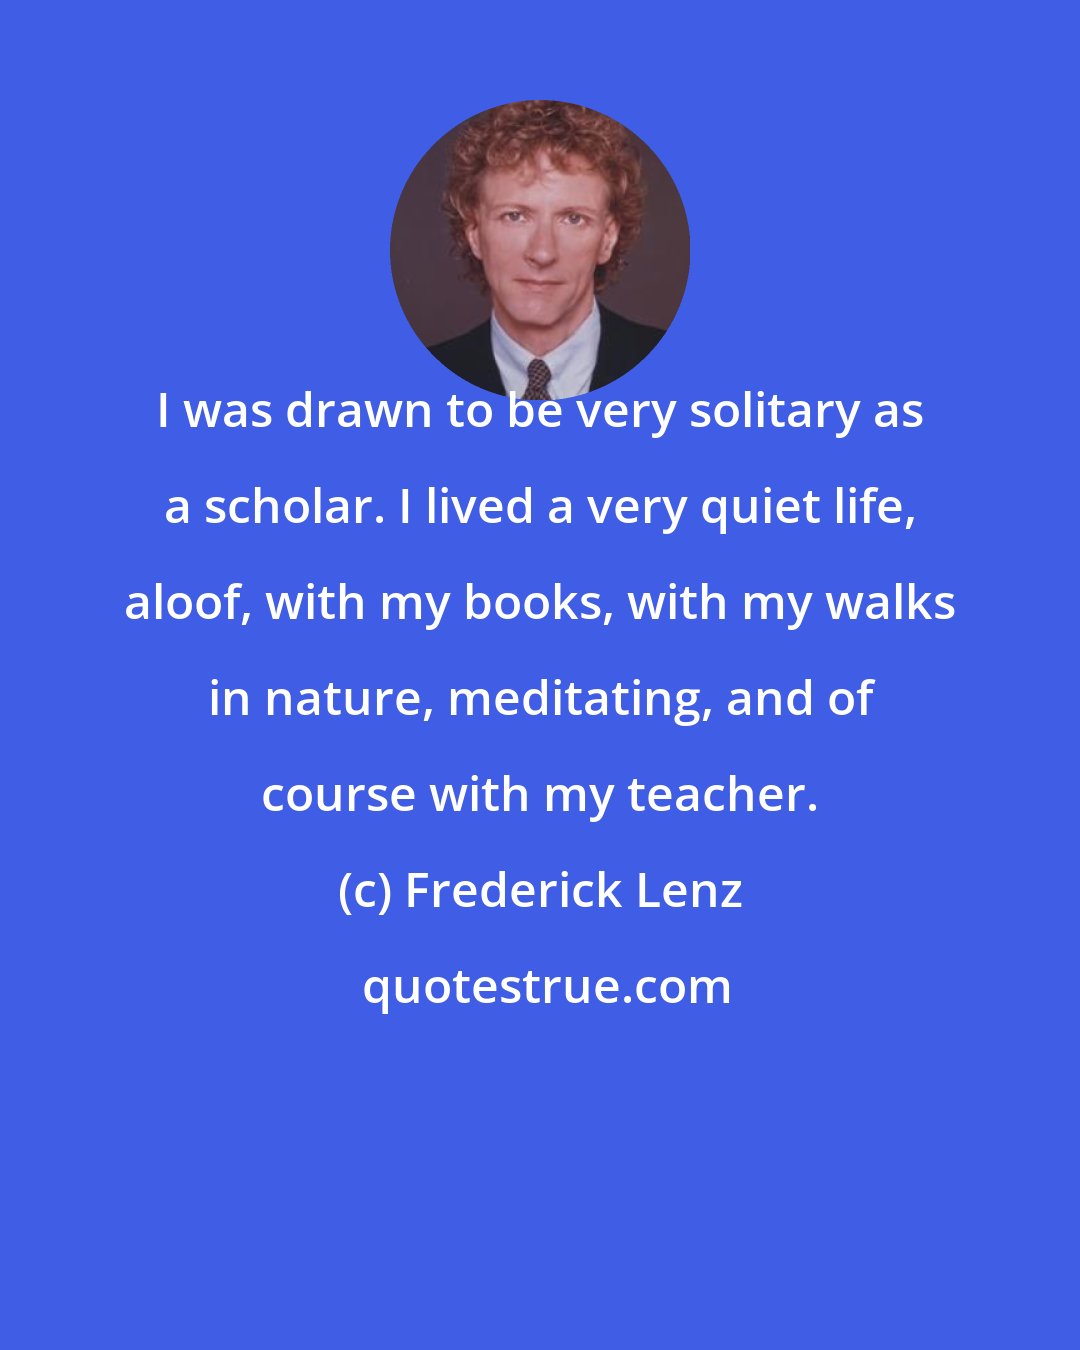 Frederick Lenz: I was drawn to be very solitary as a scholar. I lived a very quiet life, aloof, with my books, with my walks in nature, meditating, and of course with my teacher.